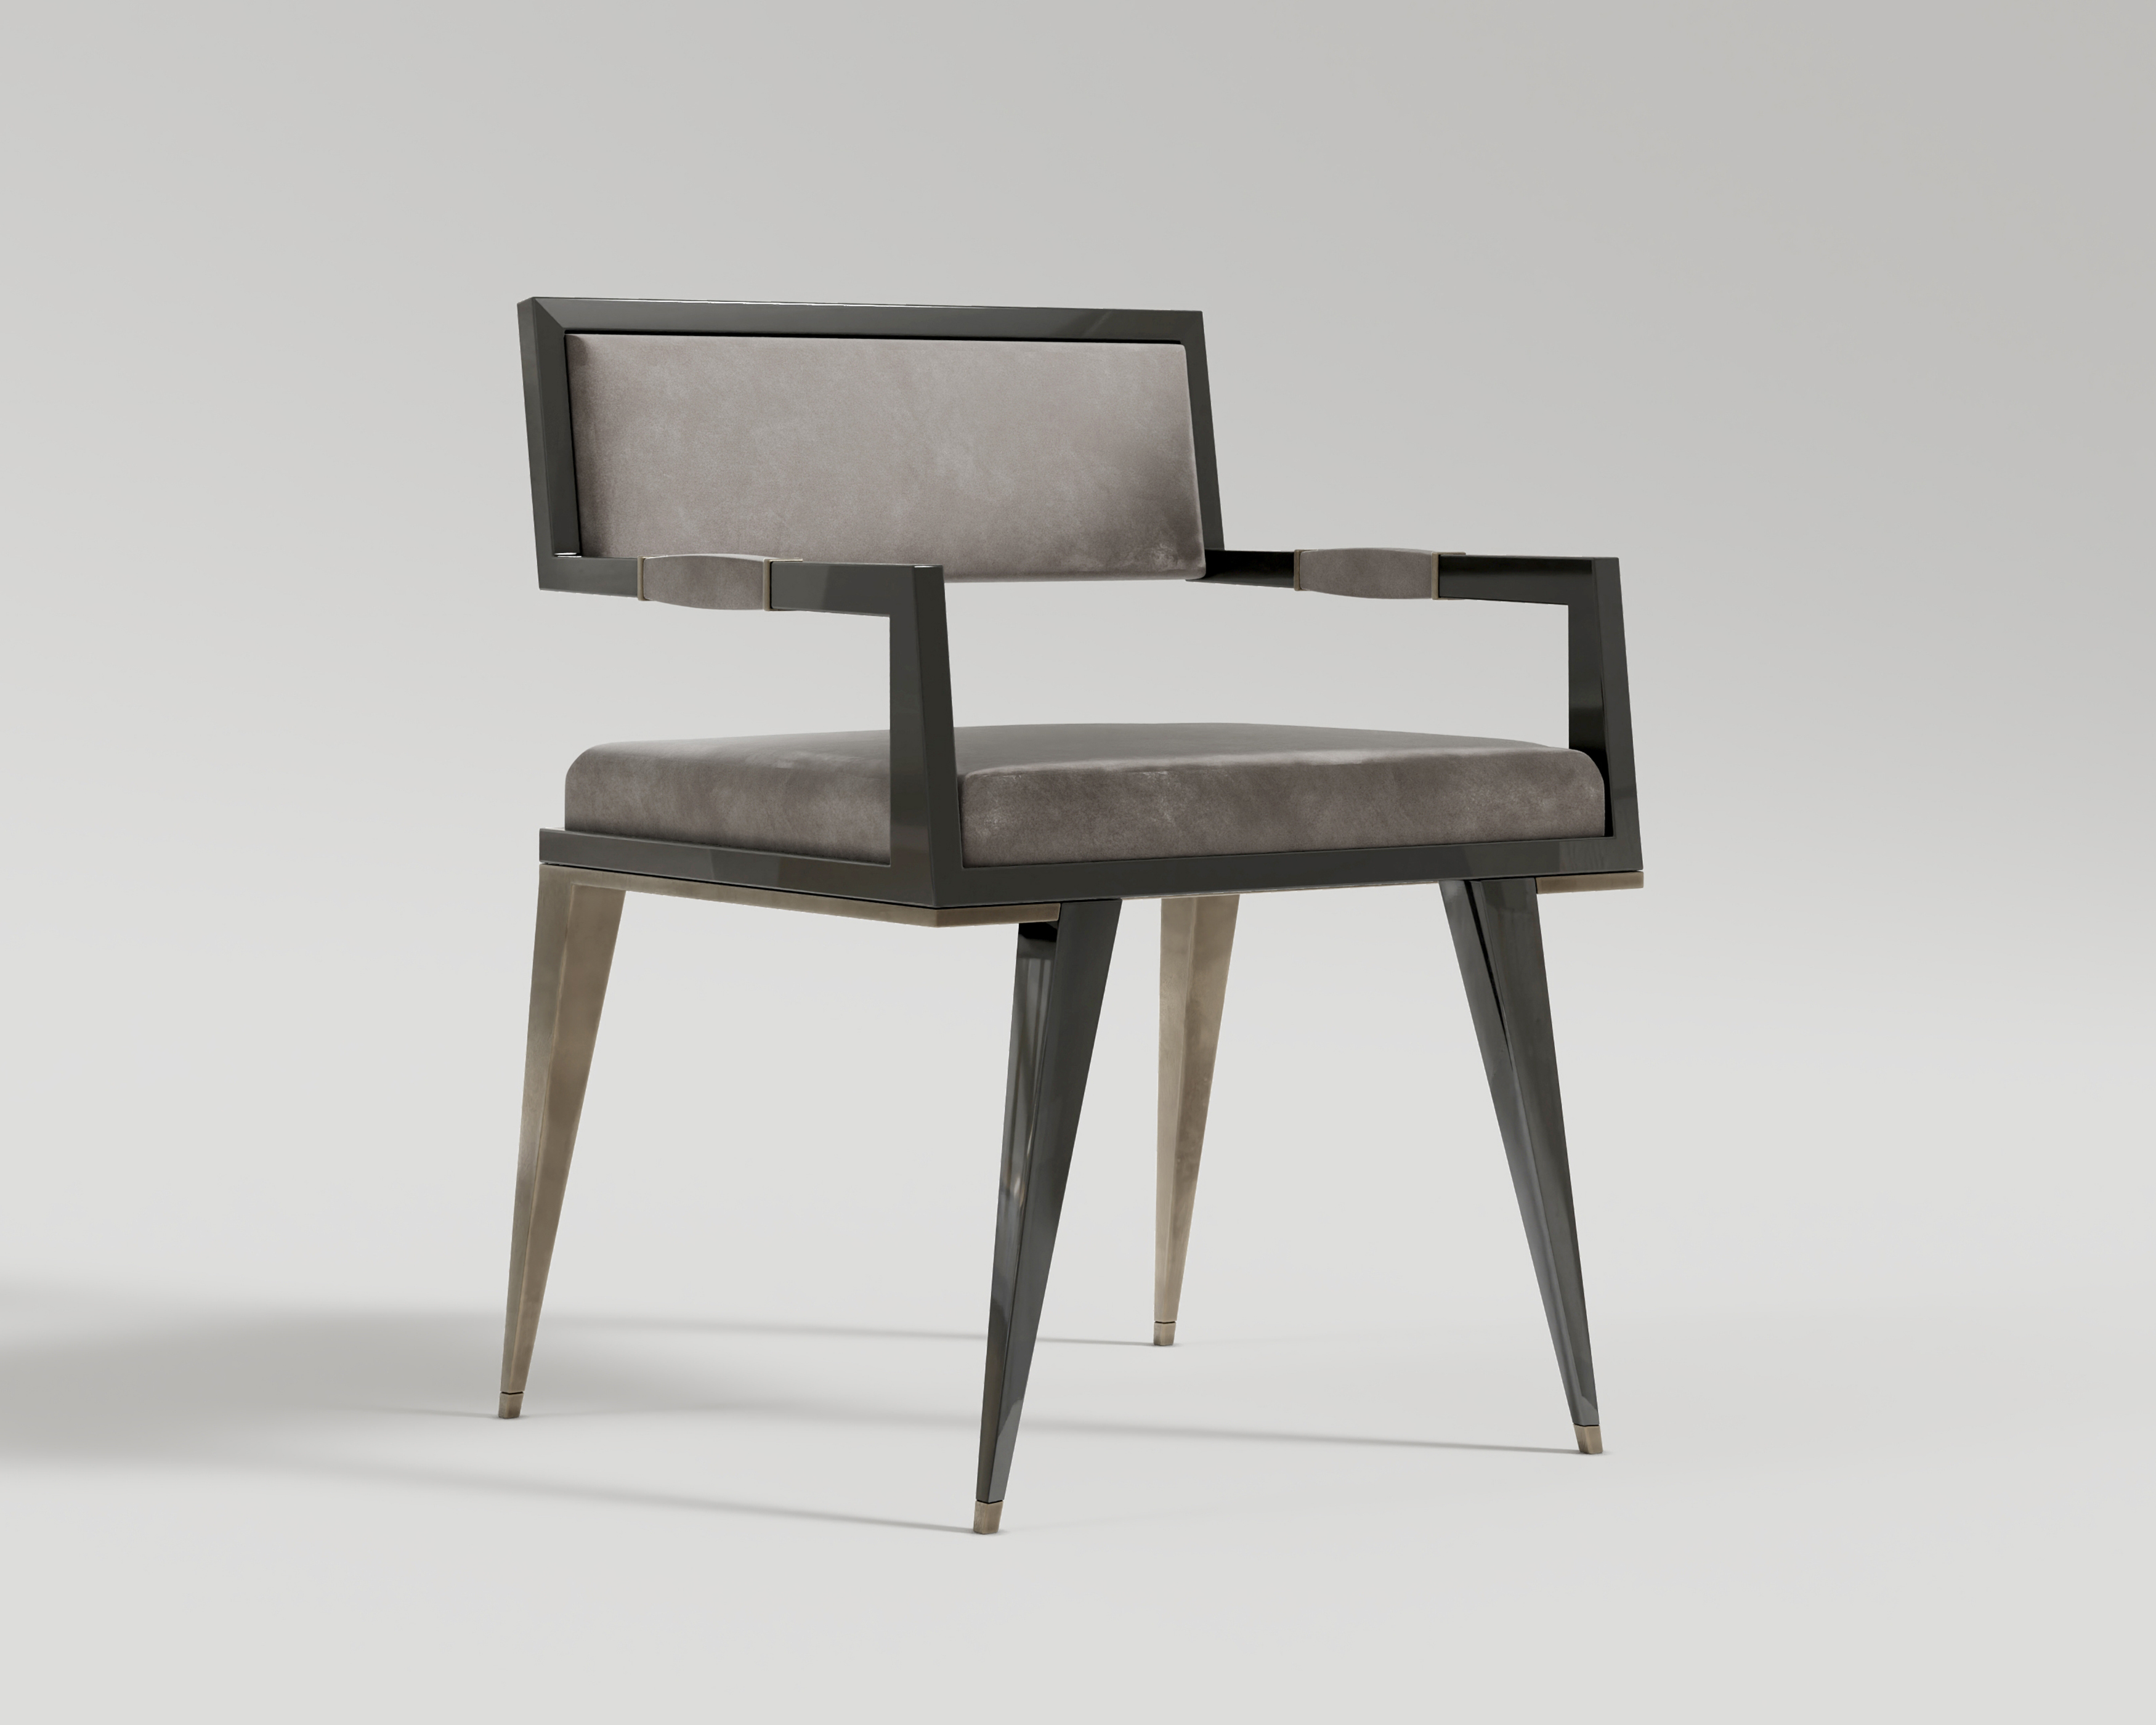 leloup_Chair_Fabric_BlackLacquer_Patina_Bronze